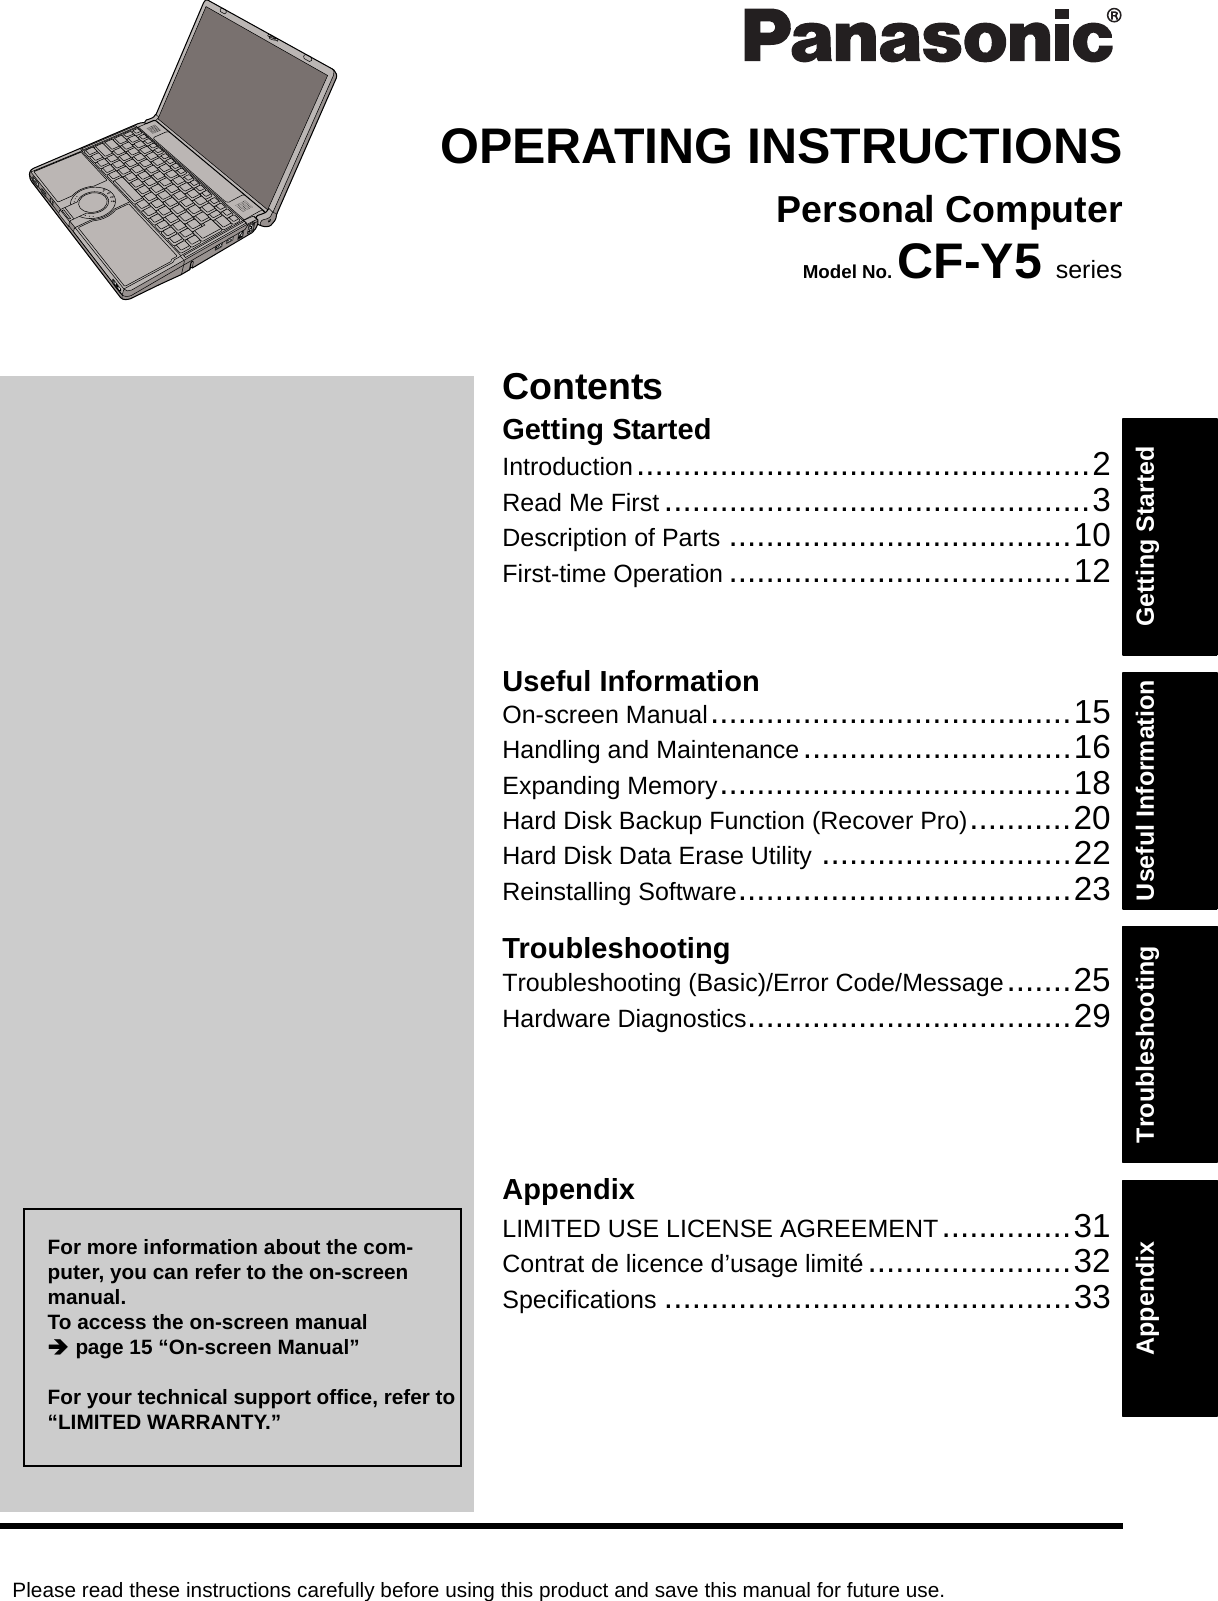 Please read these instructions carefully before using this product and save this manual for future use.ContentsGetting StartedUseful InformationTroubleshootingGetting StartedUseful InformationTroubleshootingAppendixAppendixOPERATING INSTRUCTIONSPersonal ComputerModel No. CF-Y5 seriesIntroduction.................................................2Read Me First ..............................................3Description of Parts .....................................10First-time Operation .....................................12On-screen Manual.......................................15Handling and Maintenance.............................16Expanding Memory......................................18Hard Disk Backup Function (Recover Pro)...........20Hard Disk Data Erase Utility ...........................22Reinstalling Software....................................23Troubleshooting (Basic)/Error Code/Message.......25Hardware Diagnostics...................................29LIMITED USE LICENSE AGREEMENT..............31Contrat de licence d’usage limité......................32Specifications ............................................33For more information about the com-puter, you can refer to the on-screen manual.To access the on-screen manual Îpage 15 “On-screen Manual”For your technical support office, refer to “LIMITED WARRANTY.”